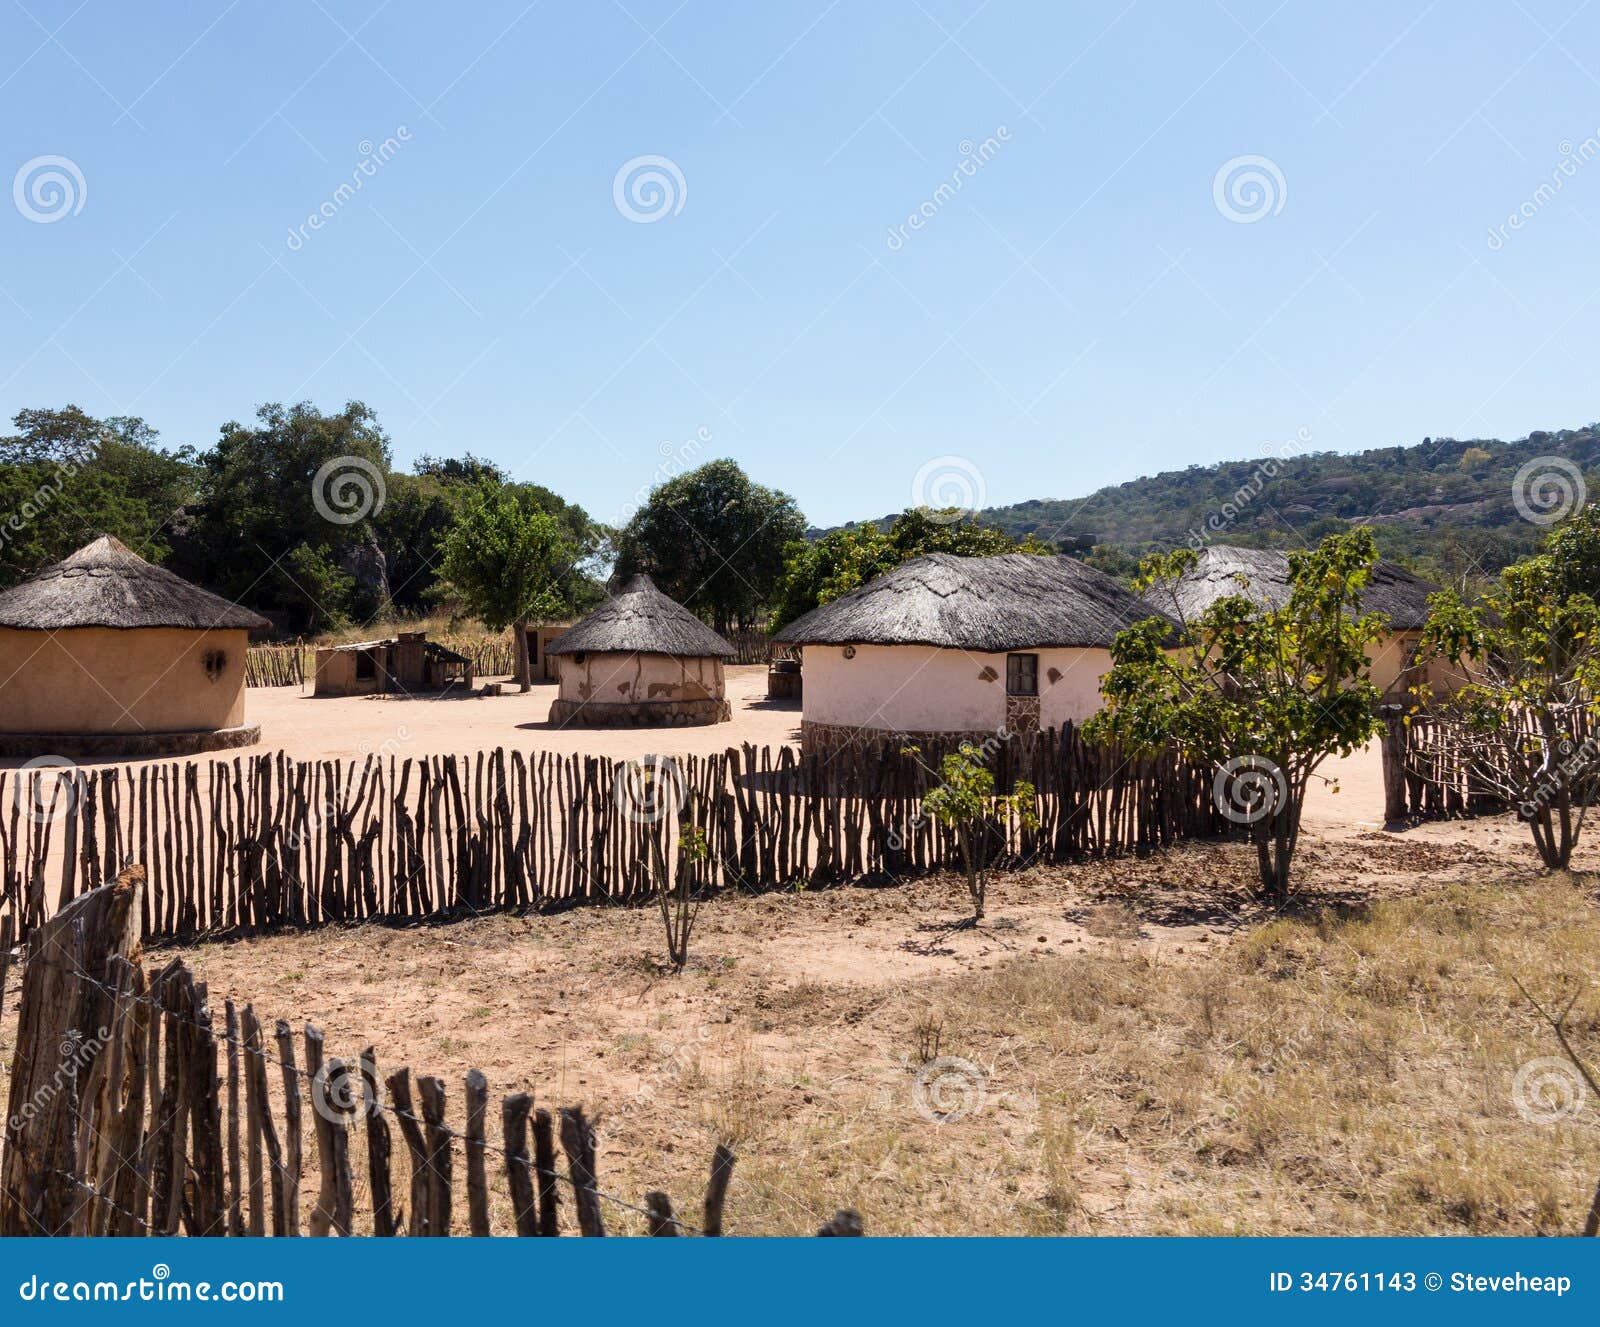 typical tribal village in zimbabwe